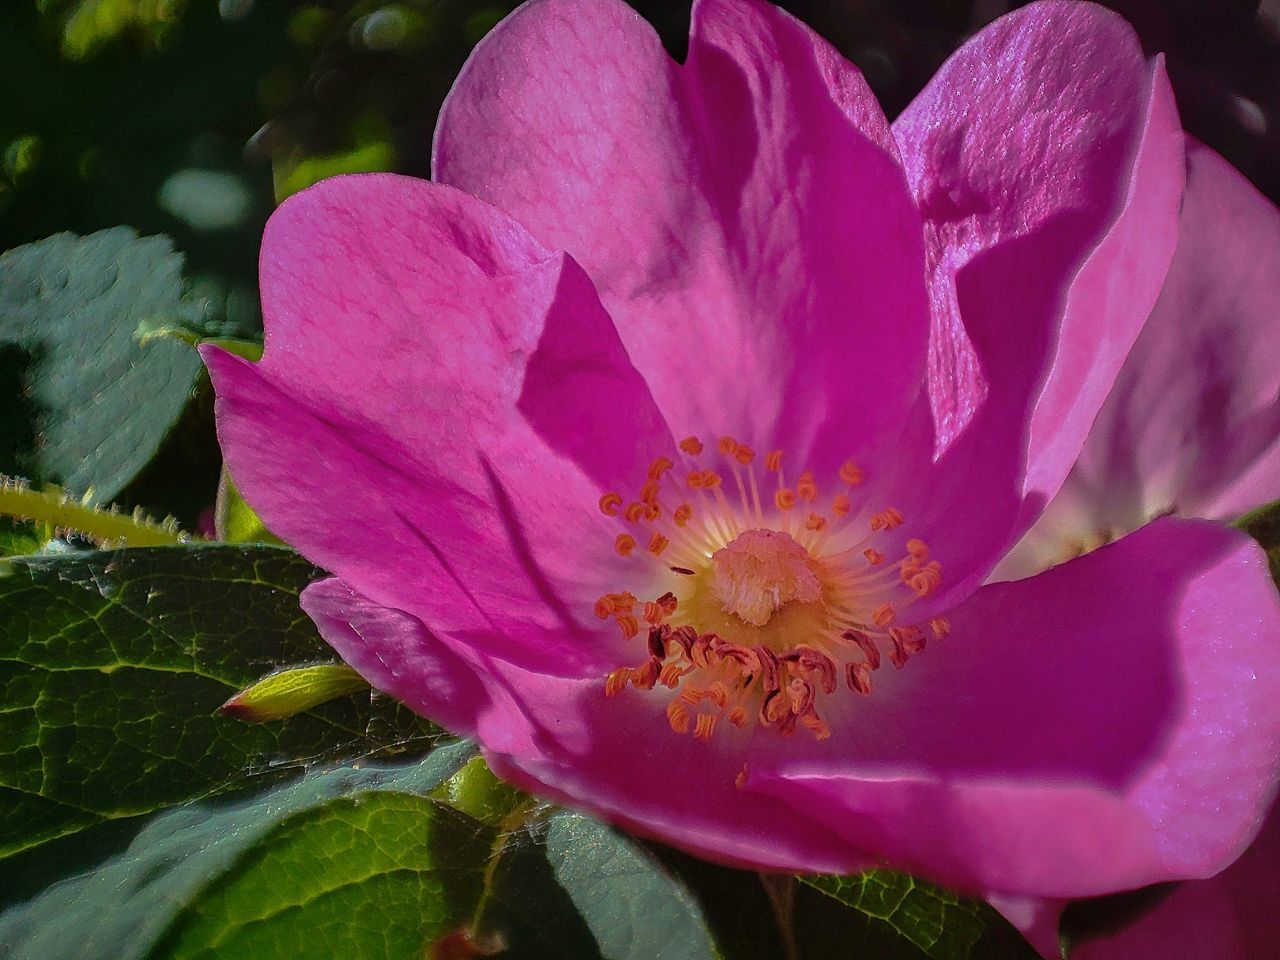 flower, flowering plant, plant, beauty in nature, freshness, petal, pink, close-up, flower head, fragility, inflorescence, growth, nature, pollen, leaf, plant part, rose, no people, stamen, blossom, magenta, outdoors, botany, springtime, macro photography, camellia sasanqua, day, purple